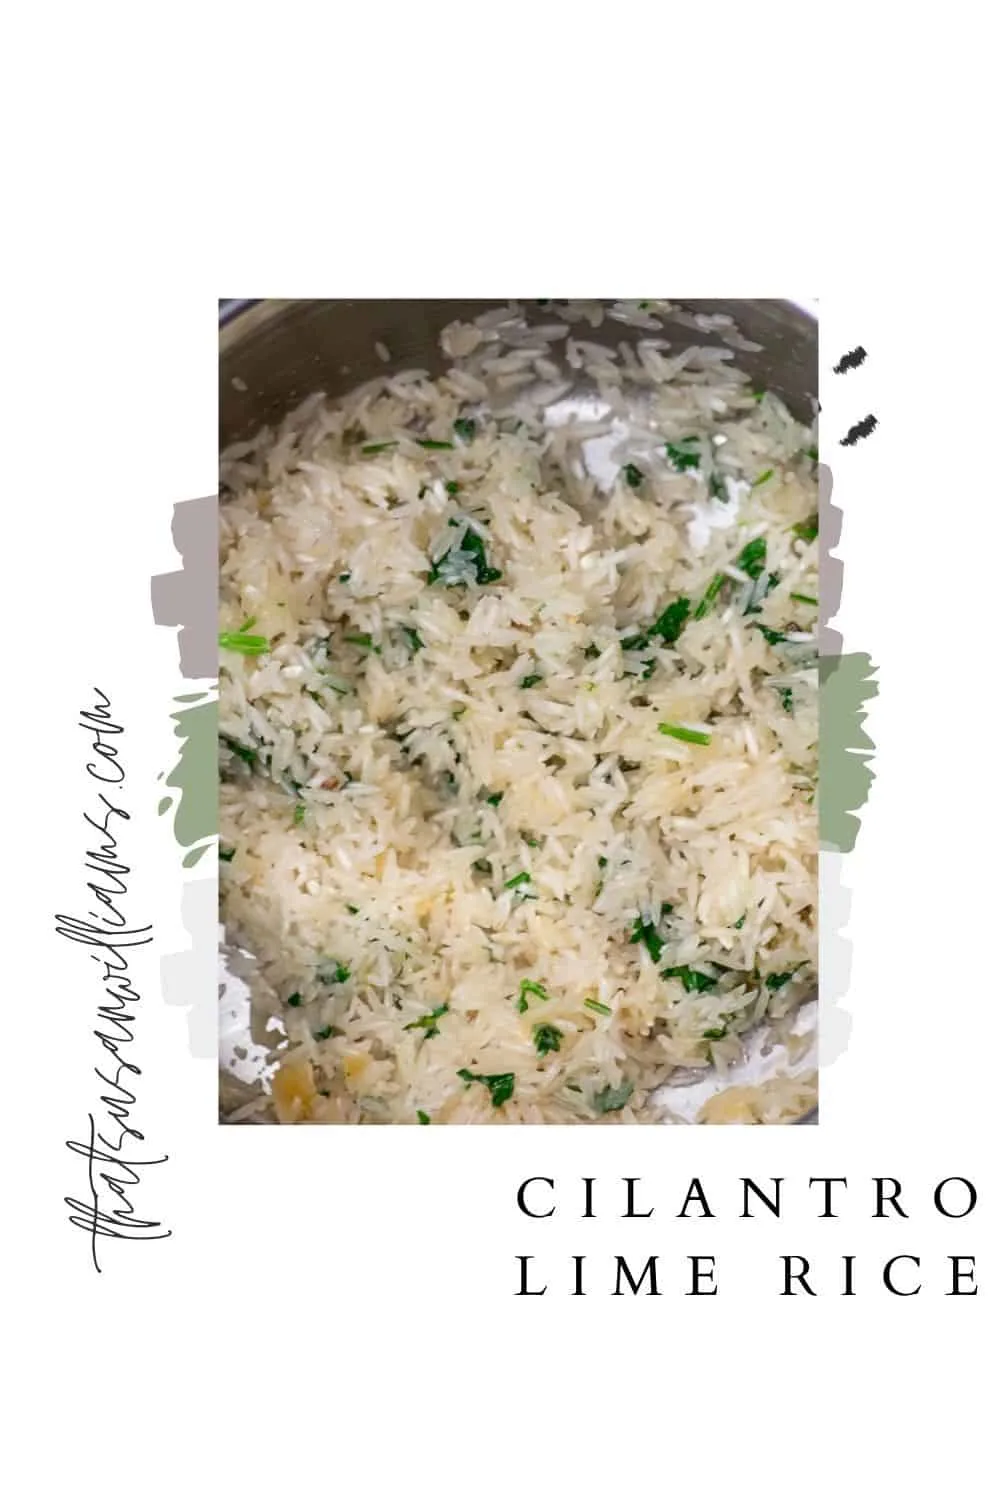 Easy Cilantro Lime Rice with Cardamom seeds pin for Pinterest